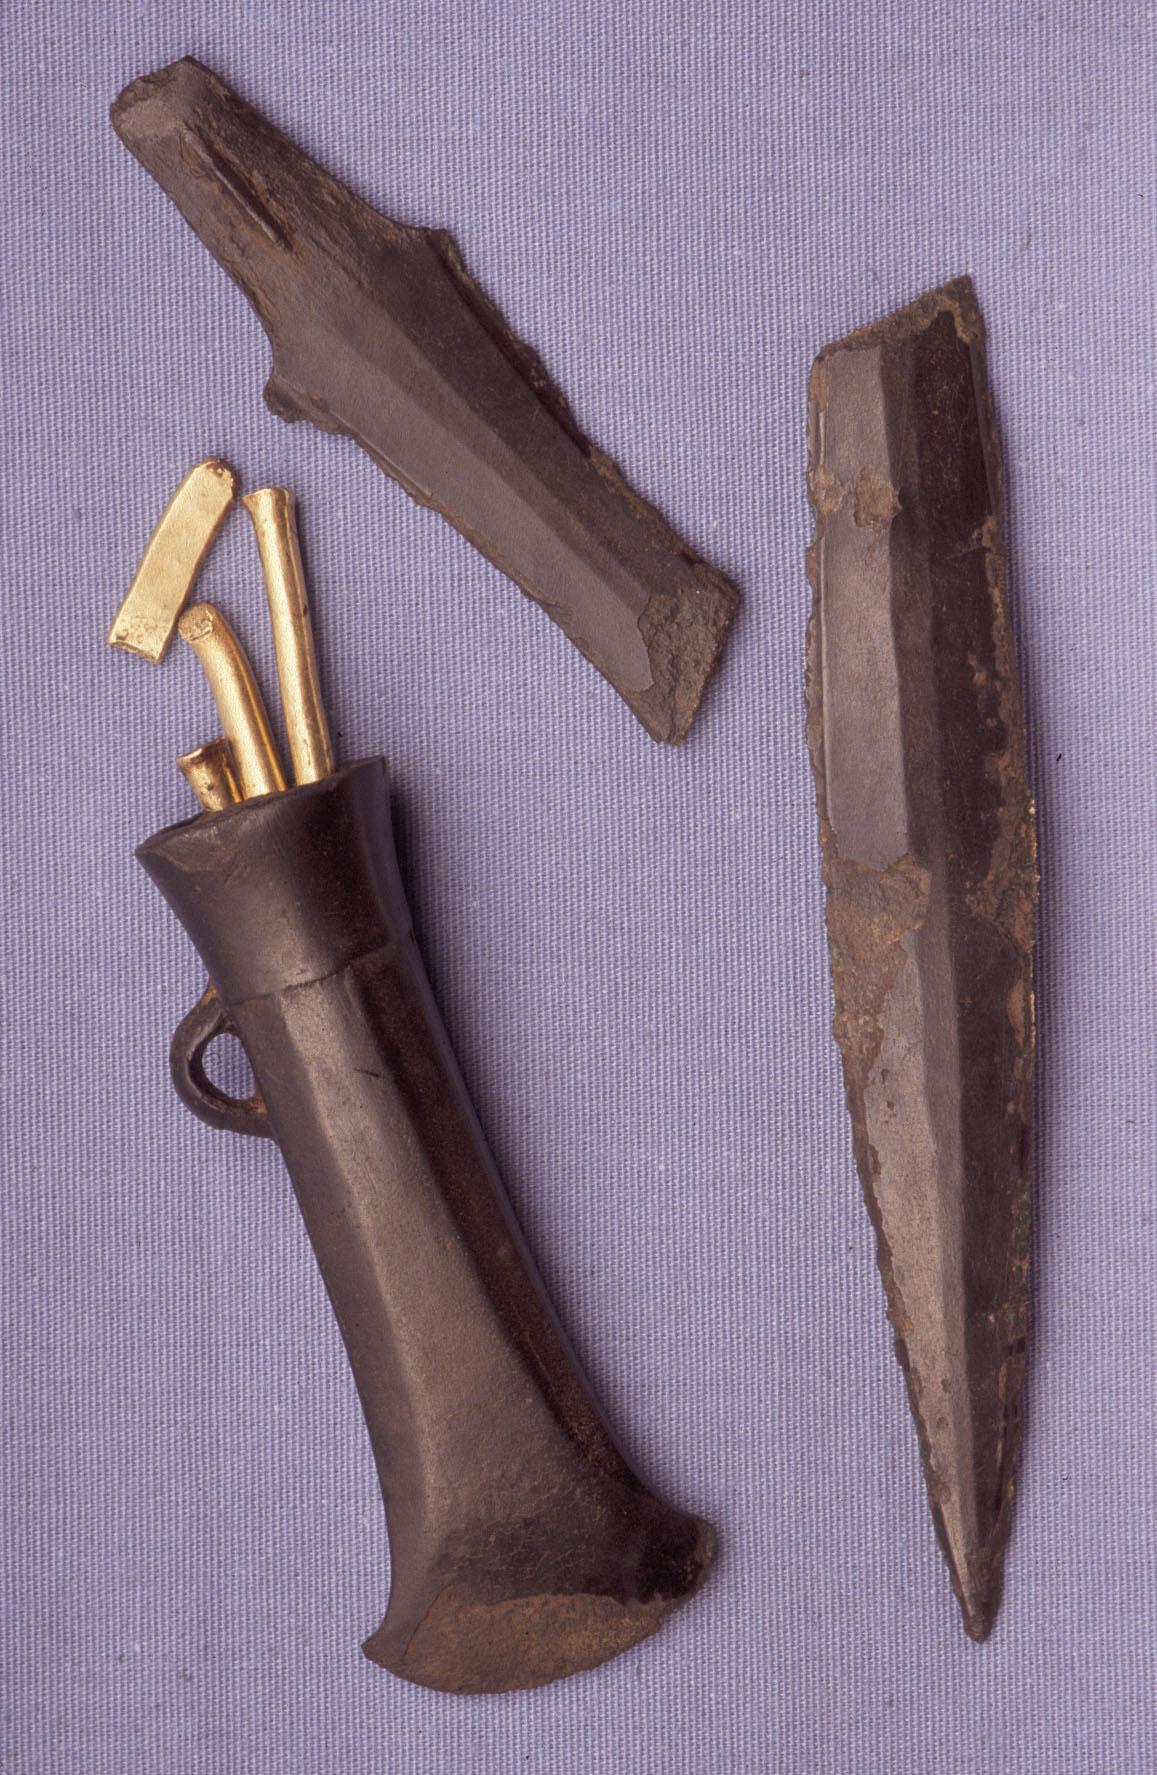 The Rossett Hoard consisting of a socketed axe, a tanged blade and 4 pieces of gold bracelet stored inside the axe. 10th-9th century BCE, now housed at the National Museum Cardiff in Wales.jpeg